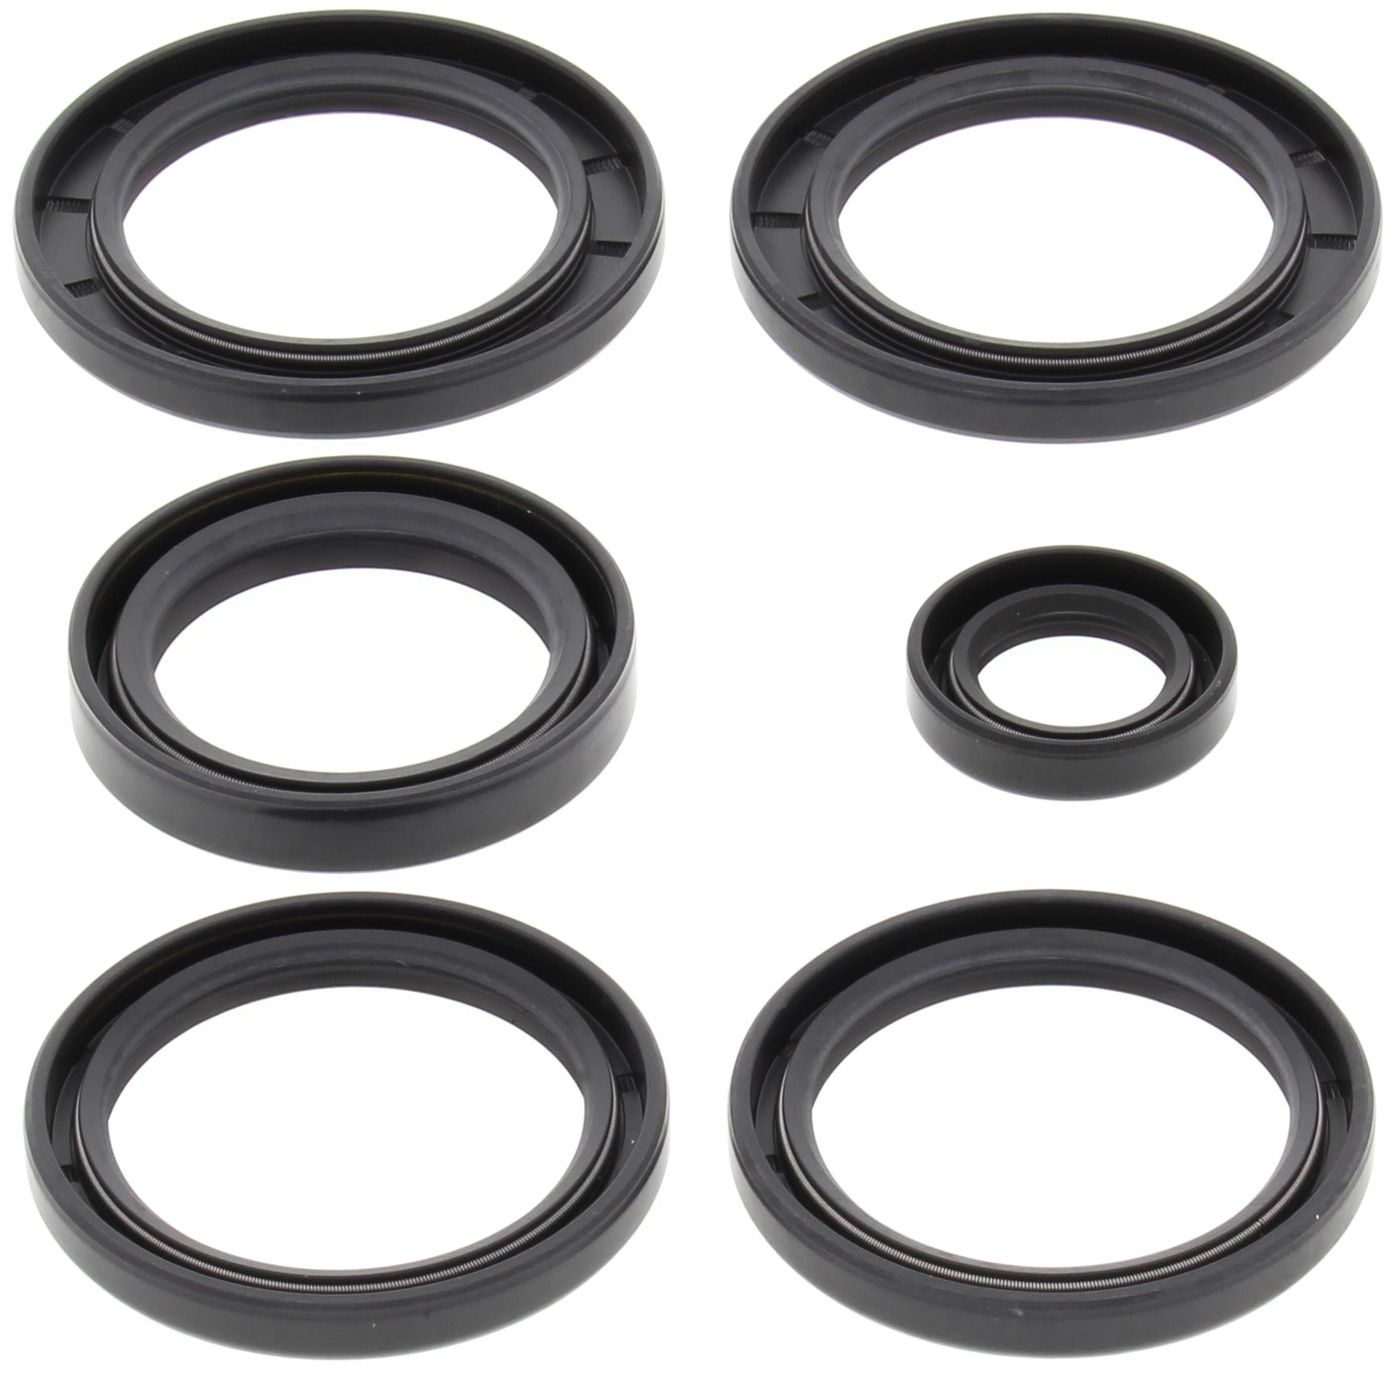 Wrp Diff Seal Kits - WRP252062-5 image